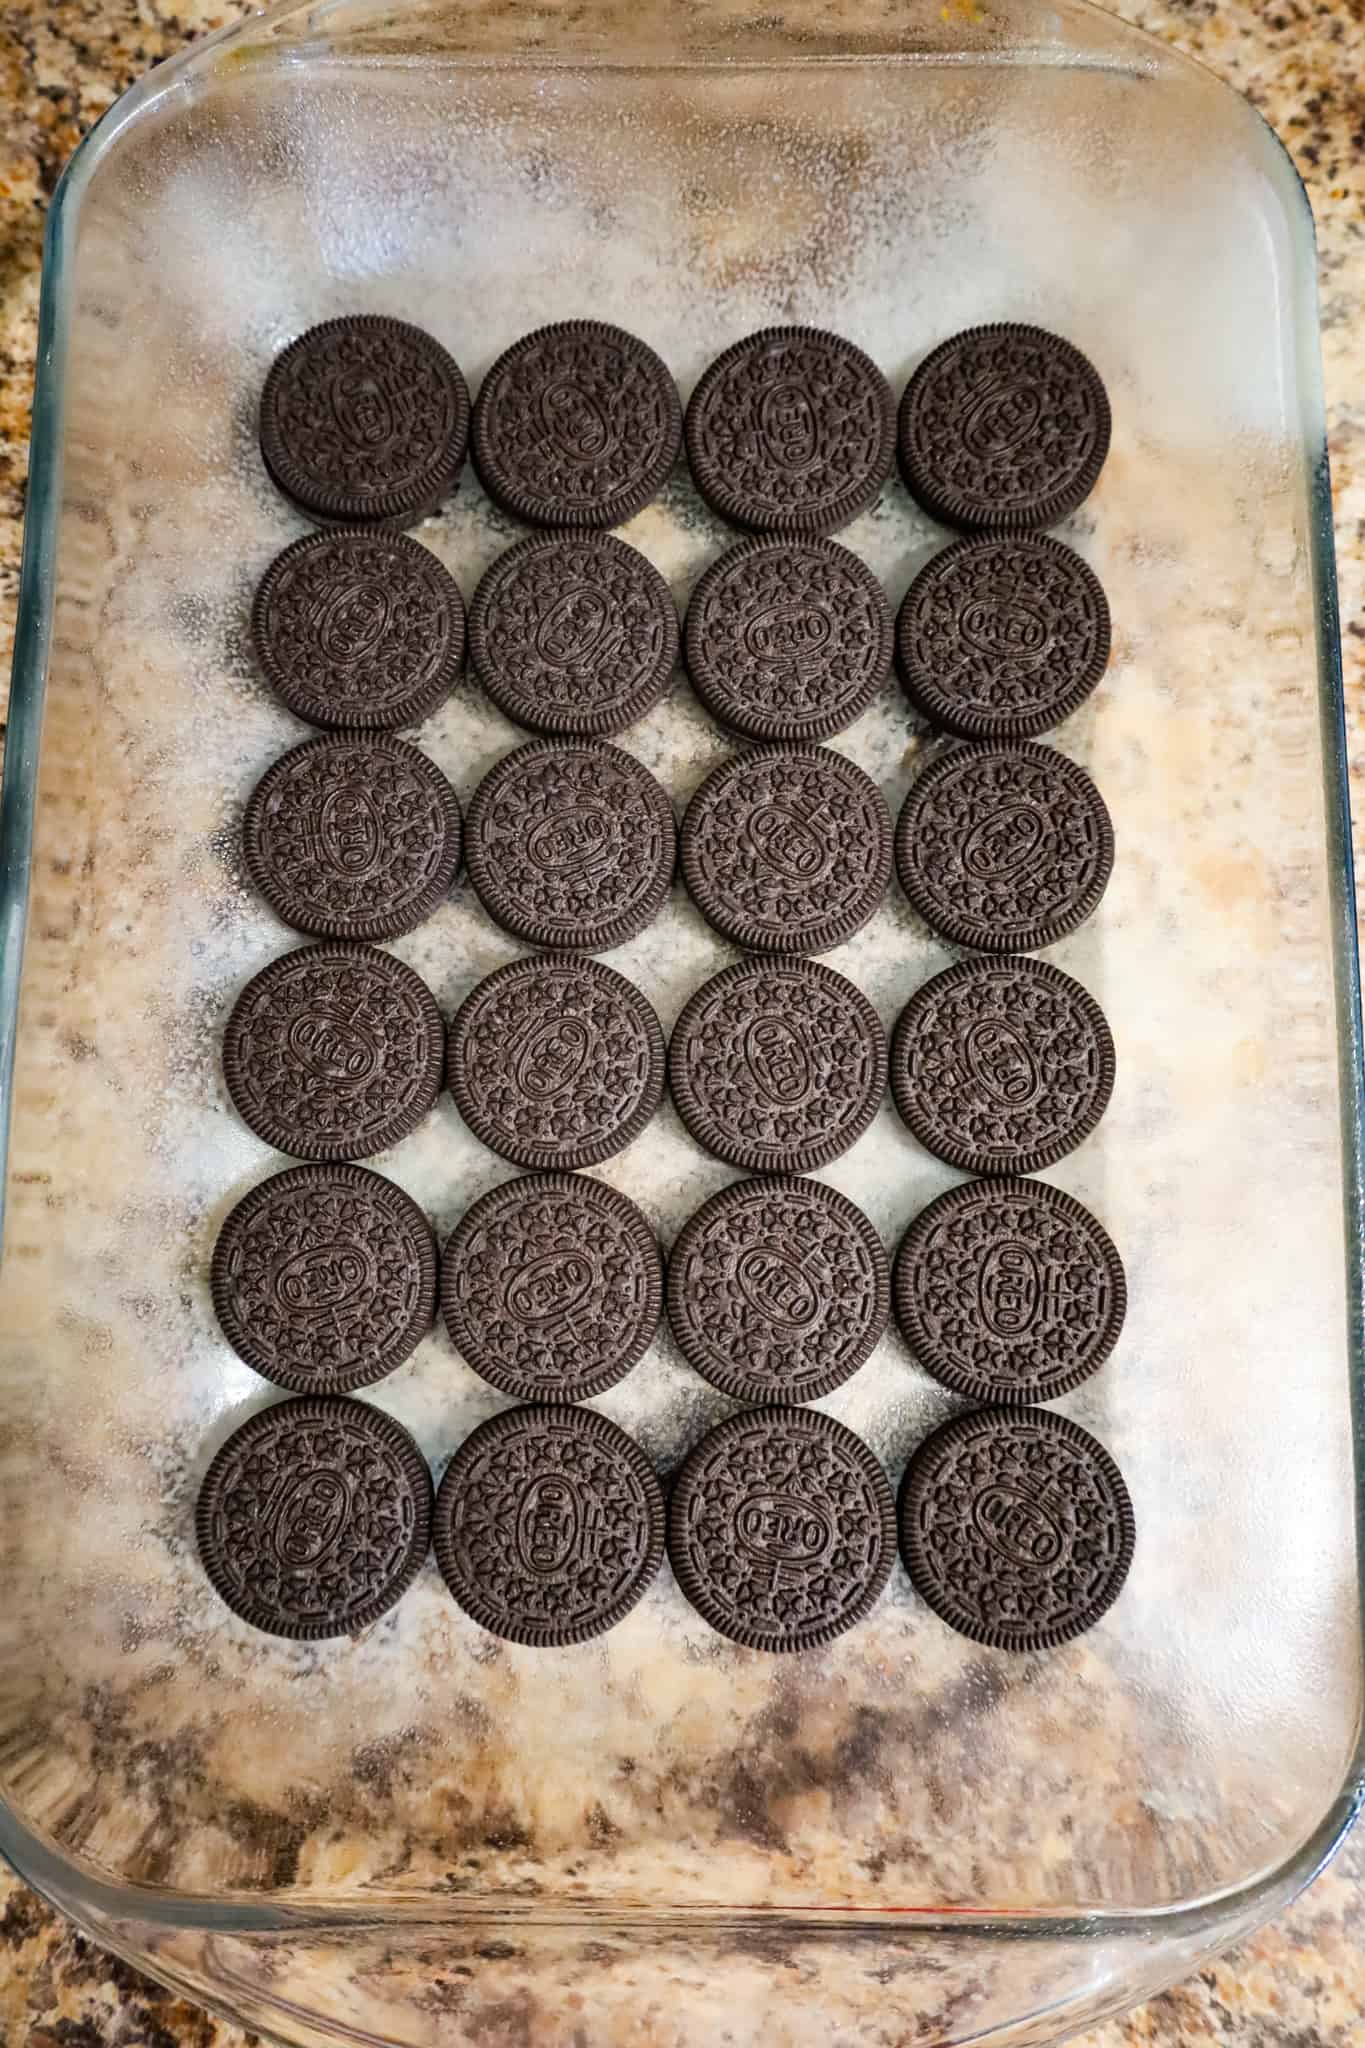 Oreo cookies in the bottom of a baking dish